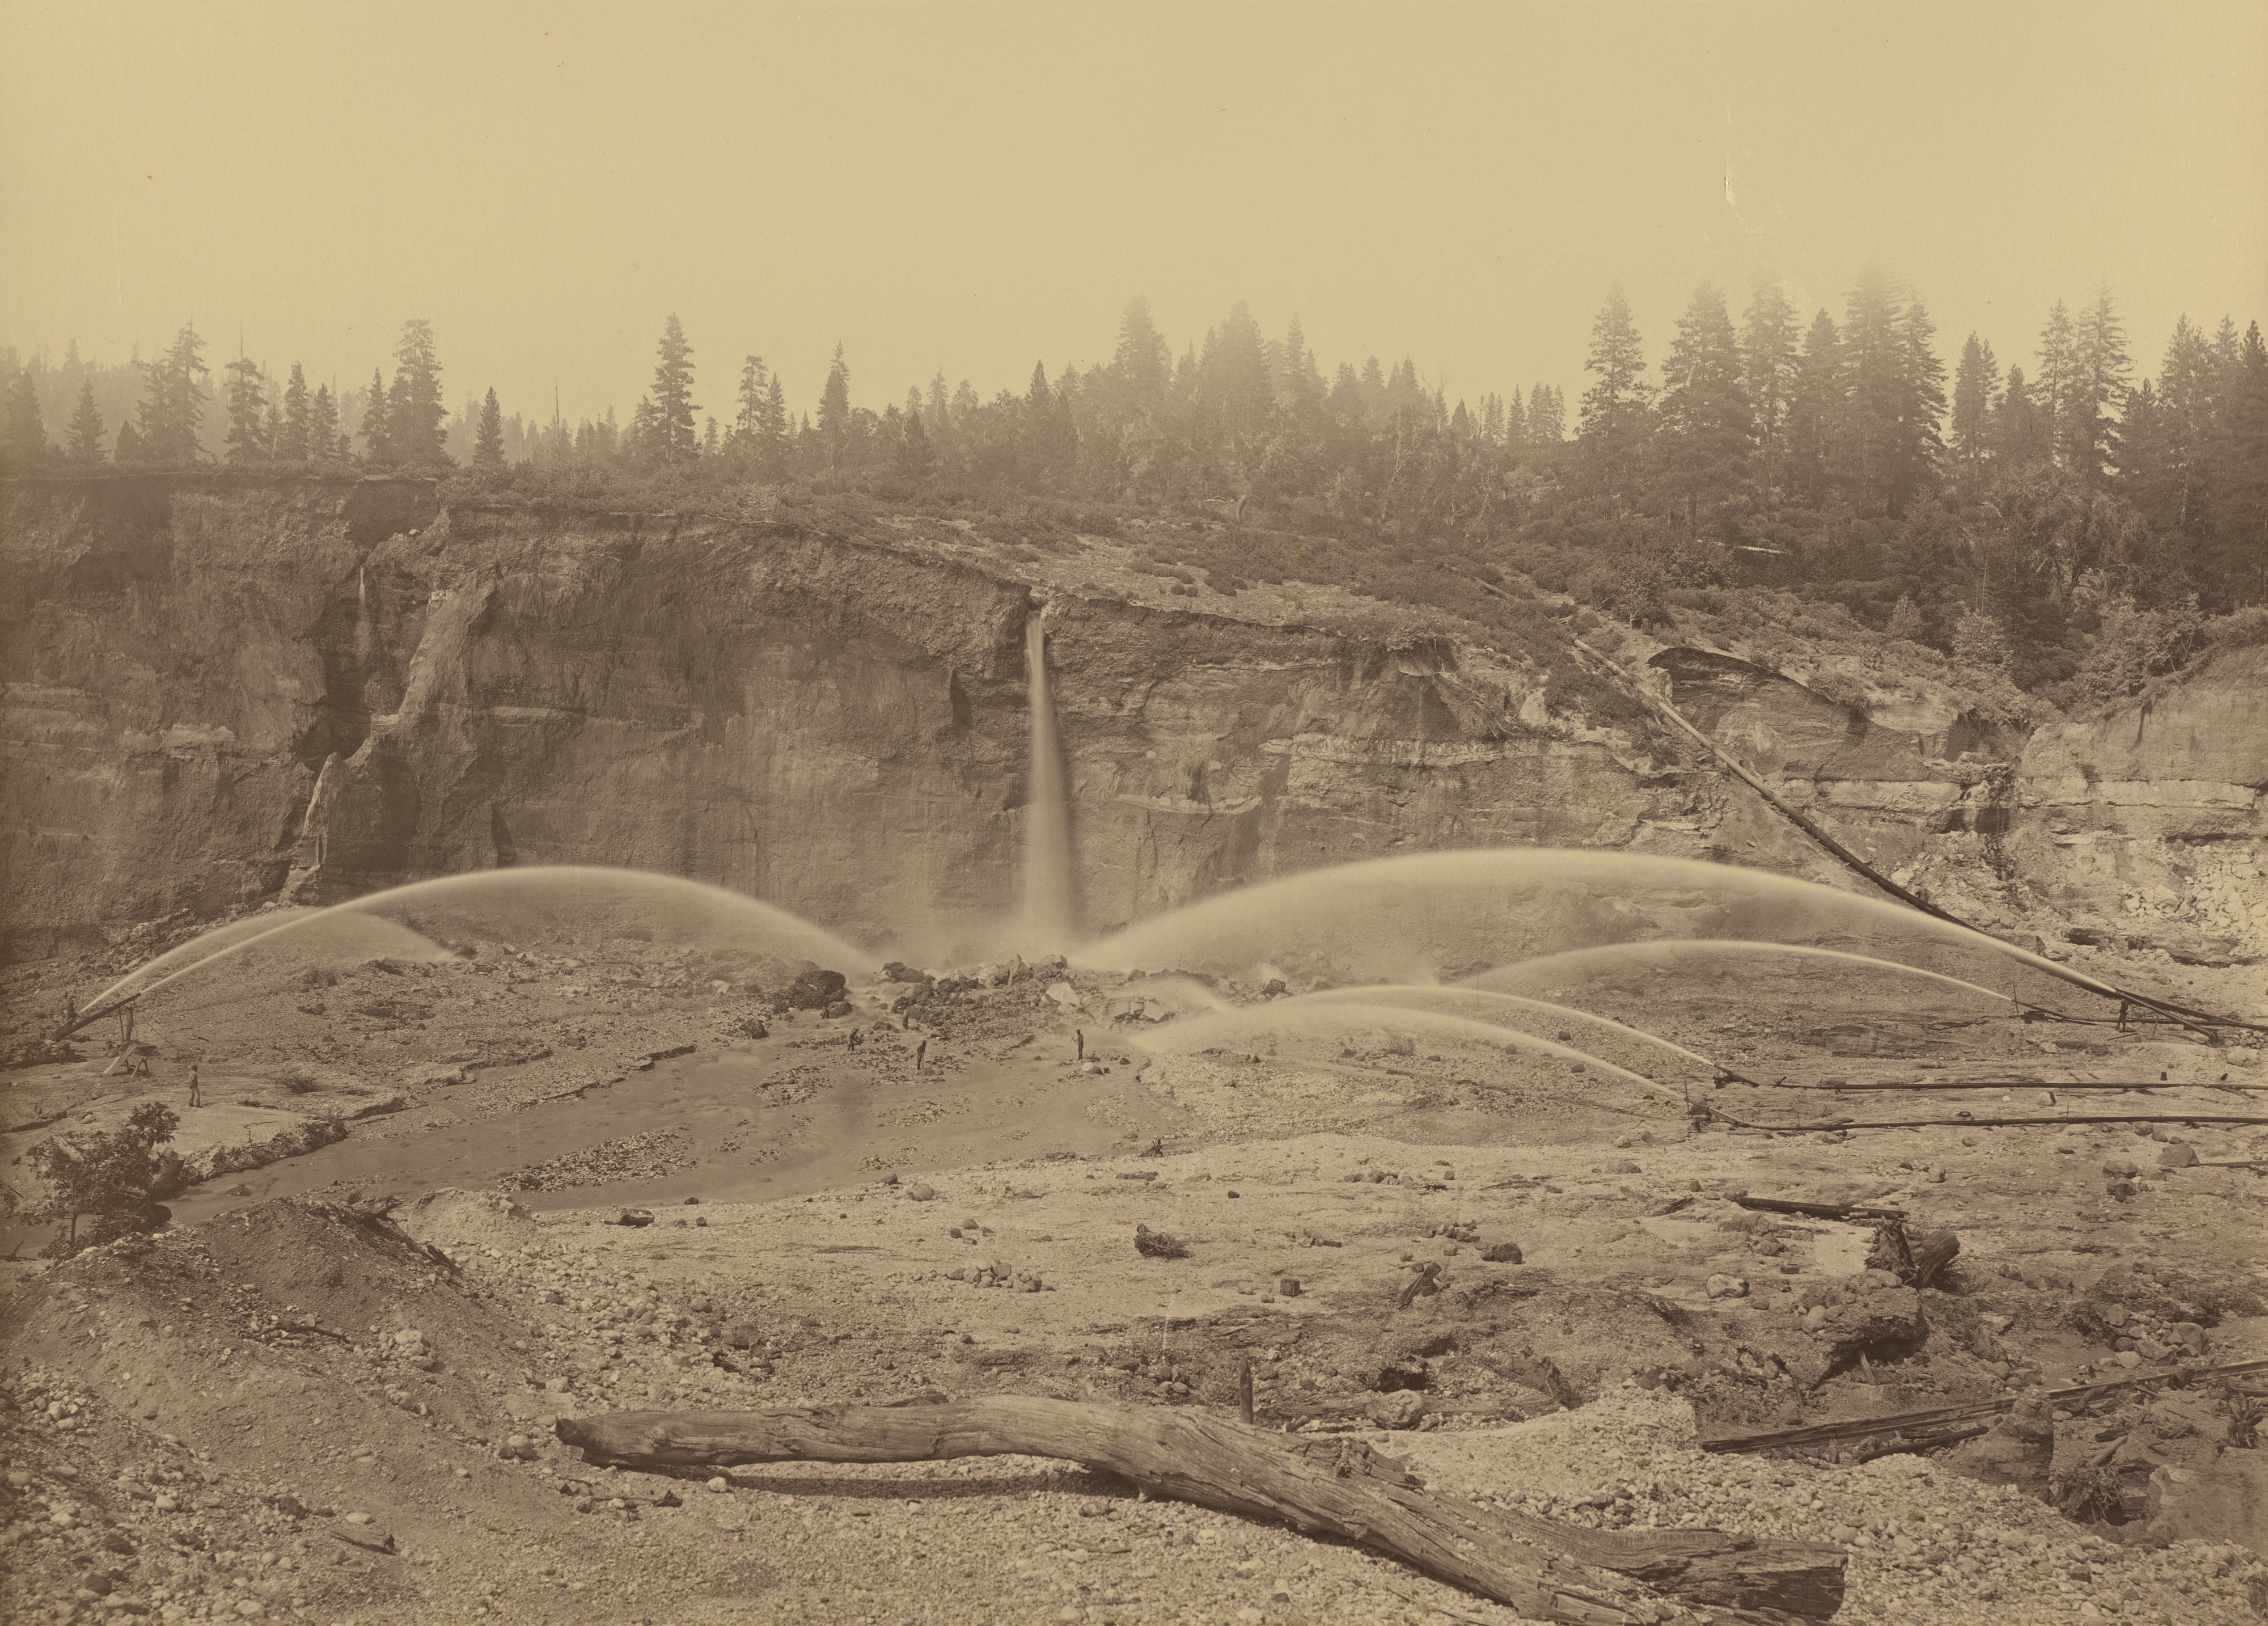 The Toxic Legacy of the Gold Rush